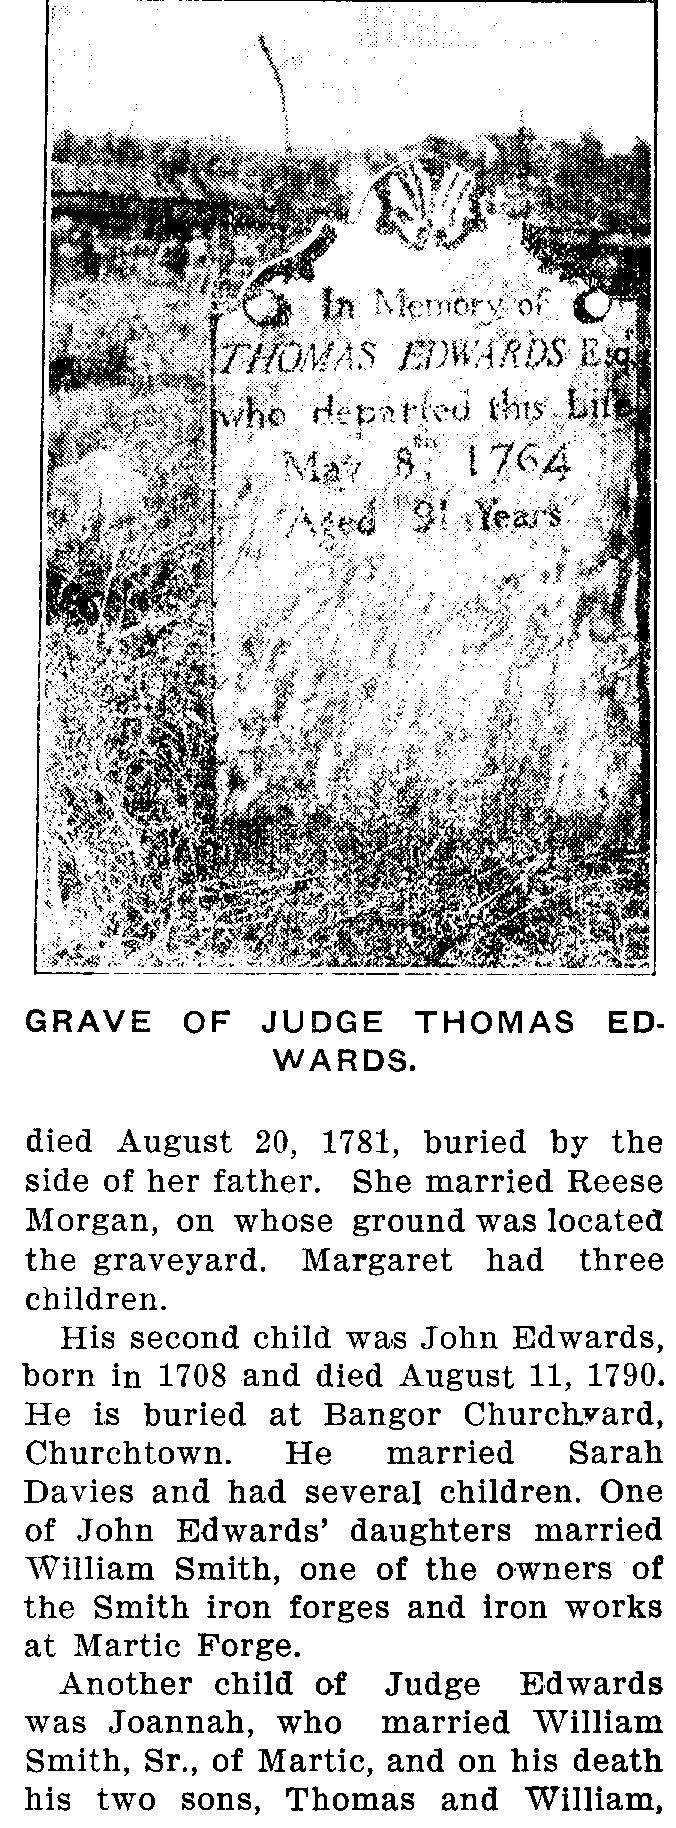 who departed GRAVE OF JUDGE THOMAS ED- WARDS. died August 20, 1781, buried by the side of her father. She married Reese Morgan, on whose ground was located the graveyard. Margaret had three children.